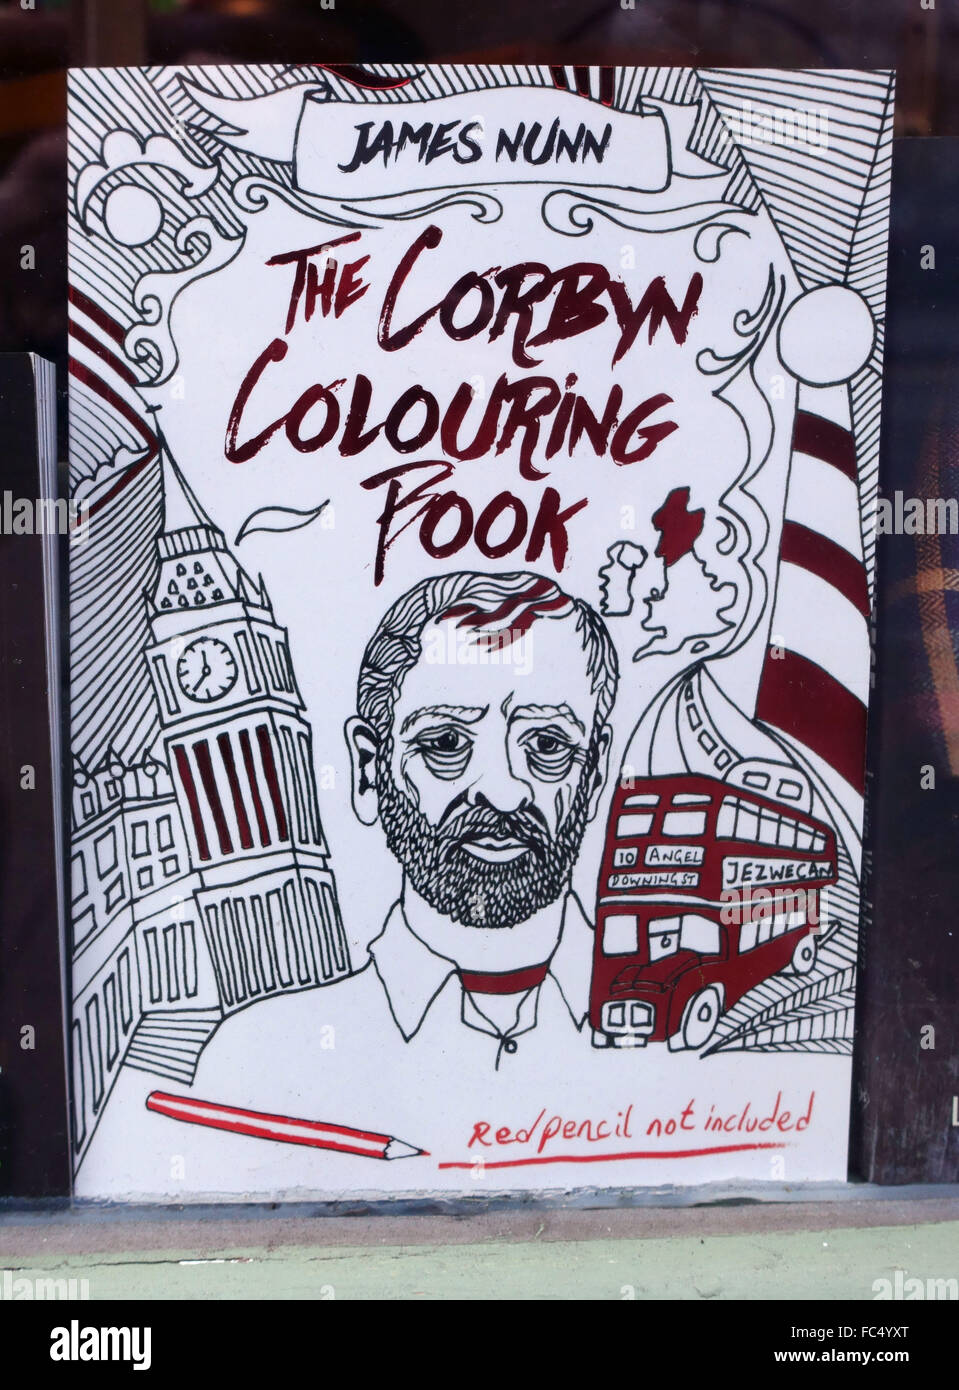 The Corbyn Colouring Book in shop window, London Stock Photo